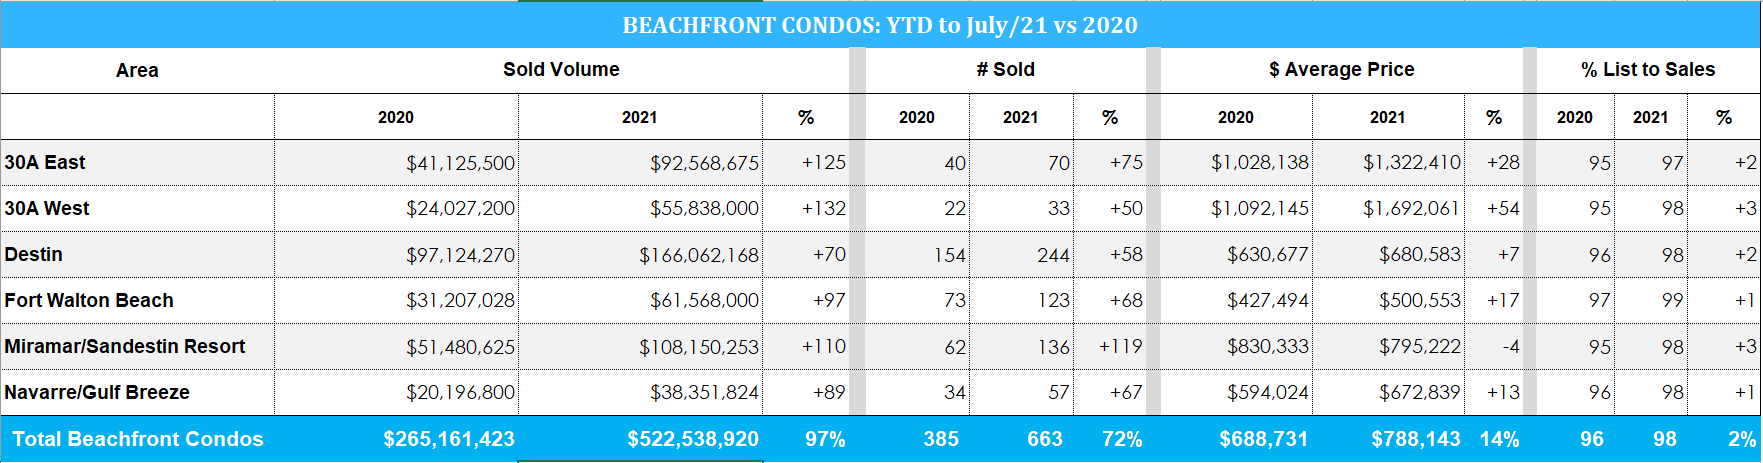 2021 Beachfront Condos Stats and Trends